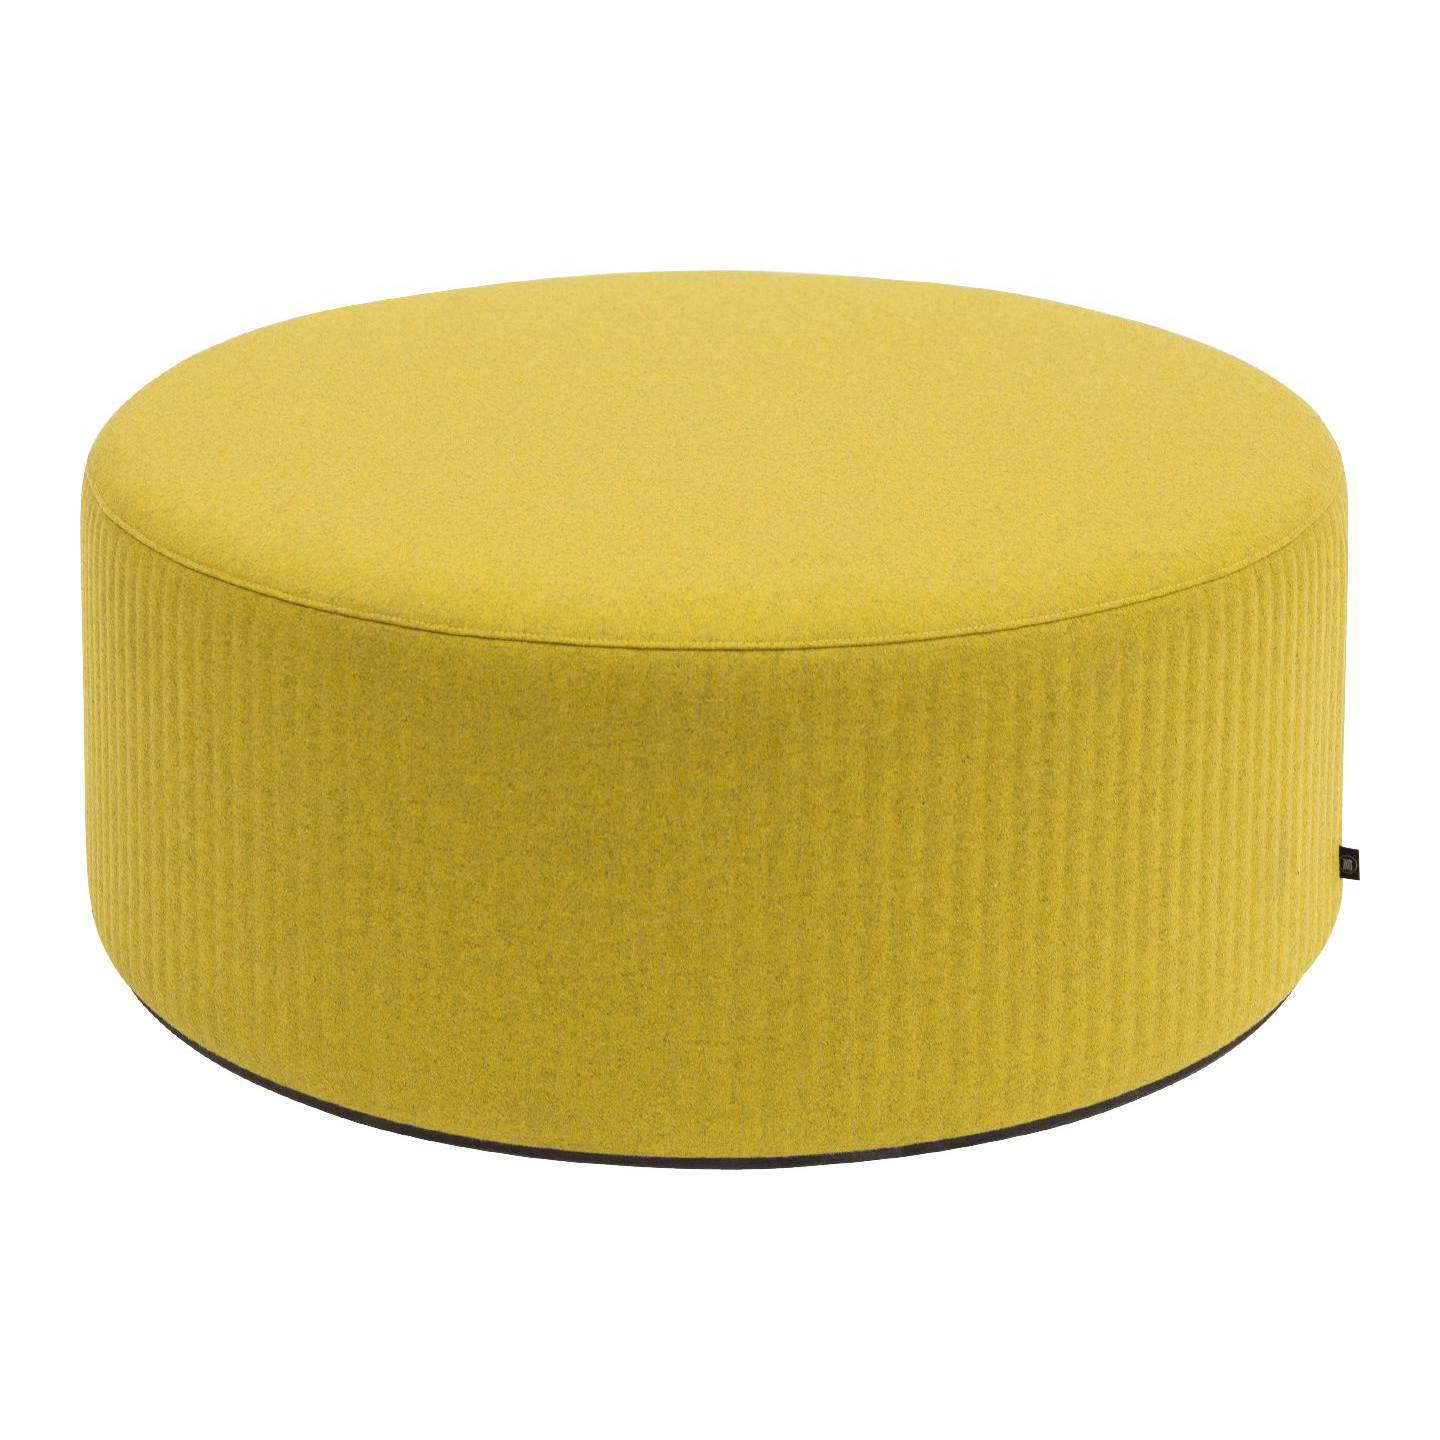 Haworth Buzzipouf in yellow fabric and round shape